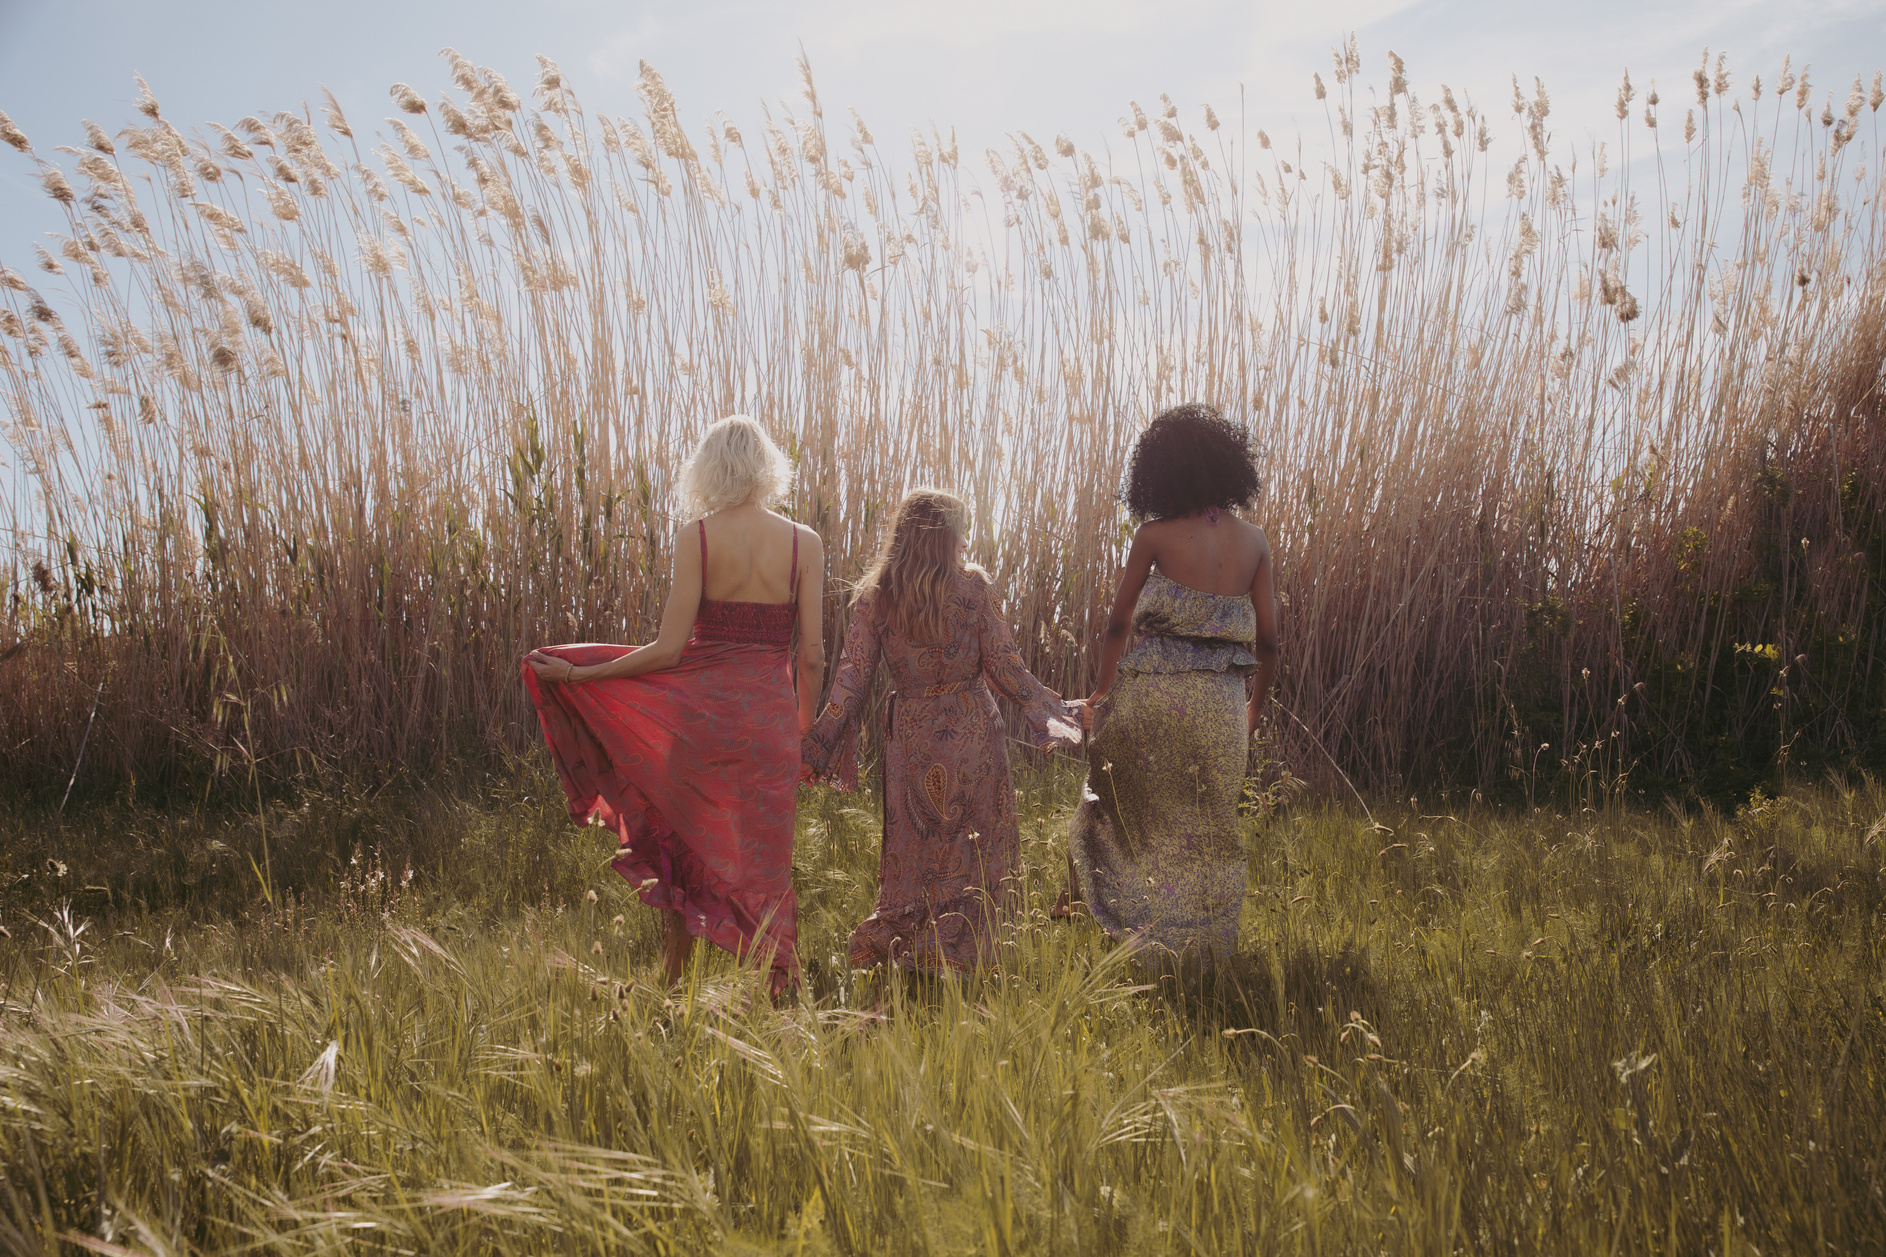 Three Diverse Women Holding Hands While Walking in the Field